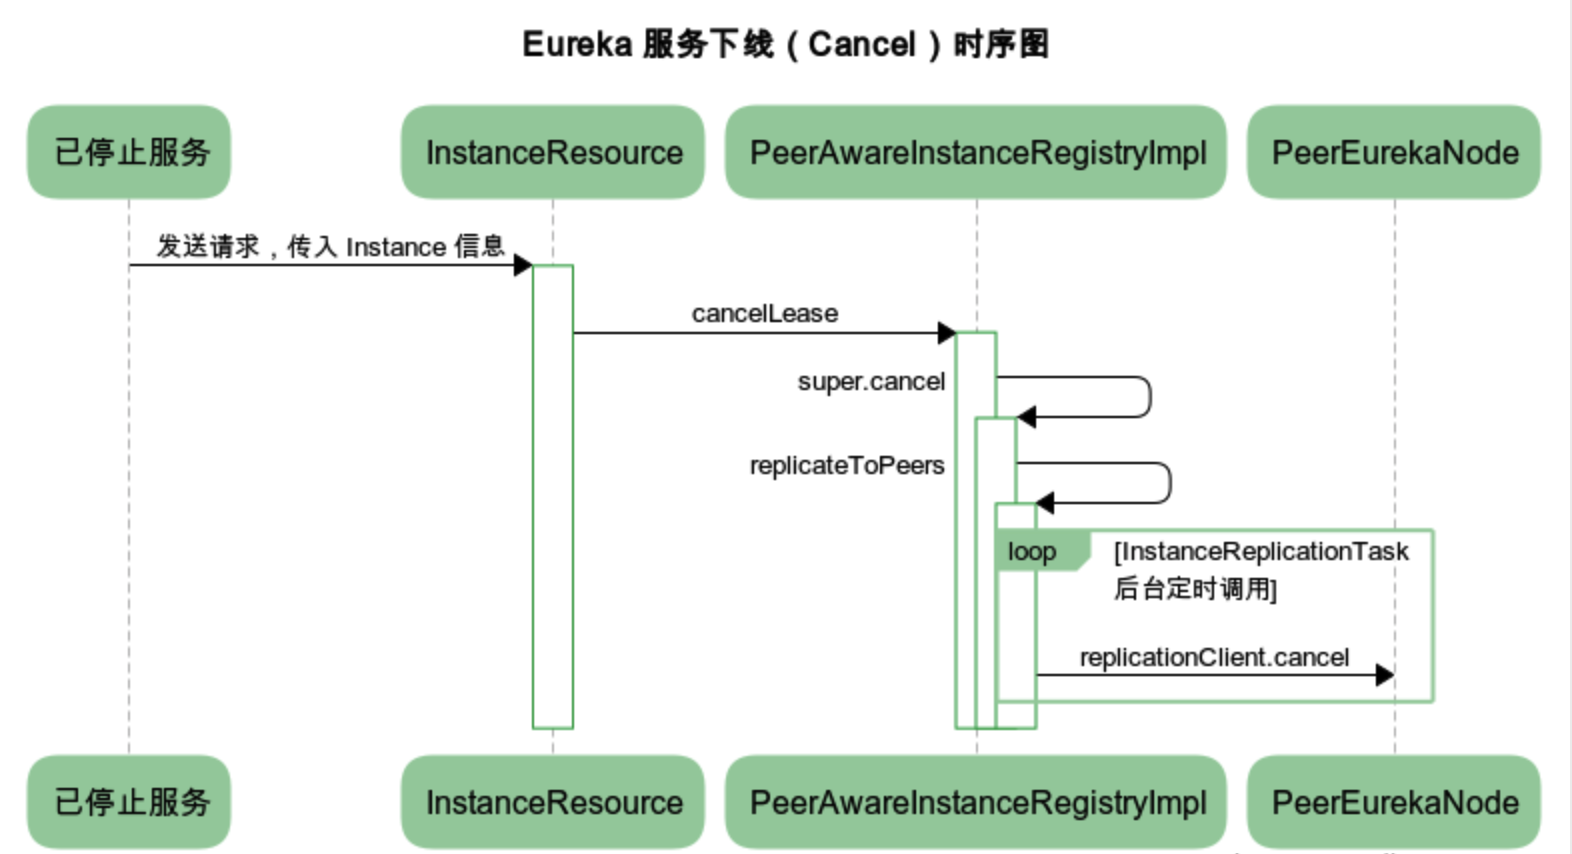 docs/micro-services/images/eureka-server-cancellease-sequence-chart.png